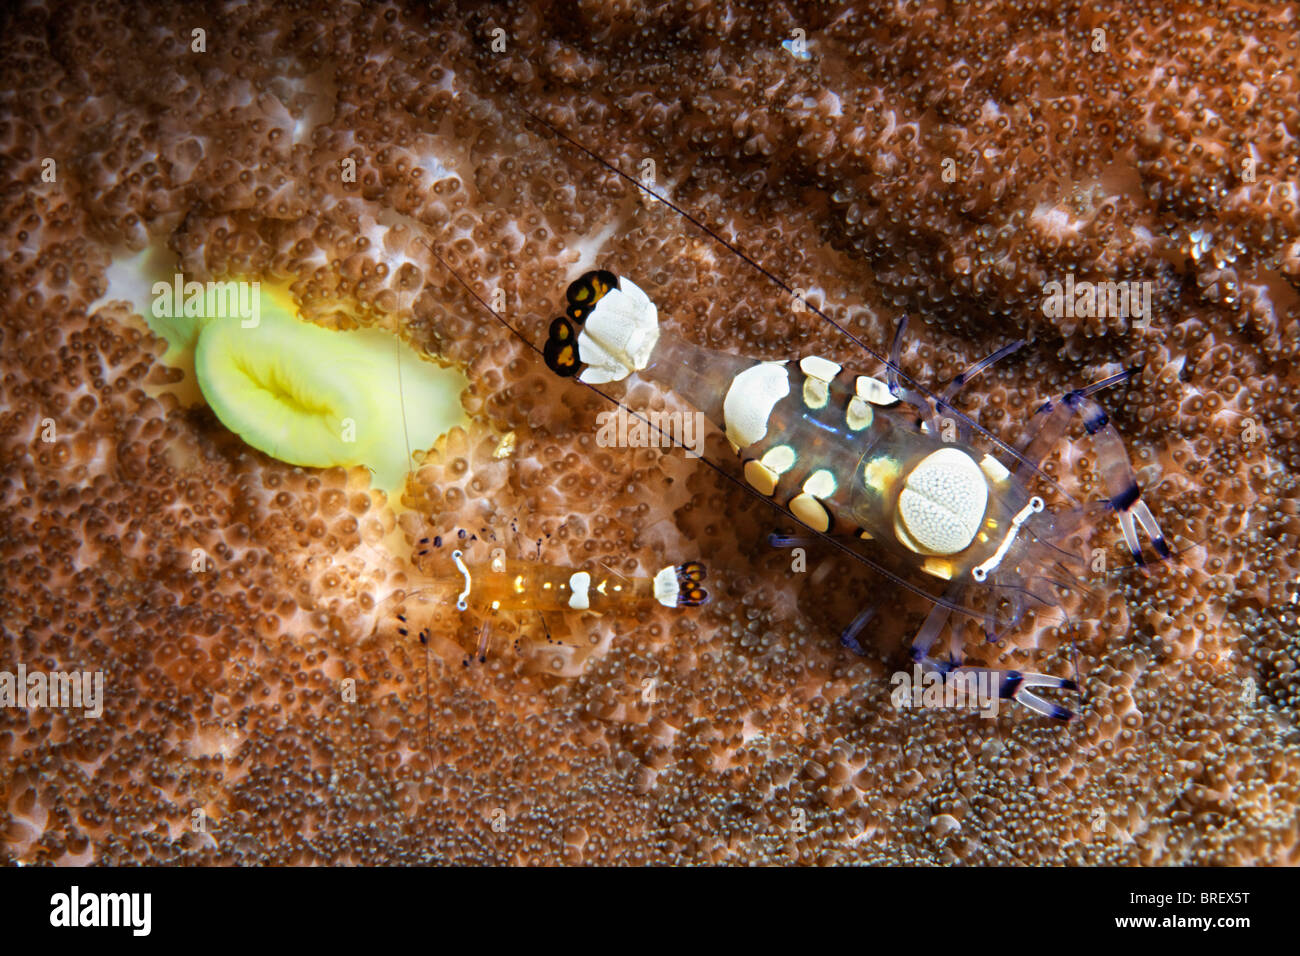 Pair of Pacific Clown Anemone Shrimps, White-patched Anemone Shrimps or Glass Anemone Shrimps (Periclimenes brevicarpalis), Stock Photo